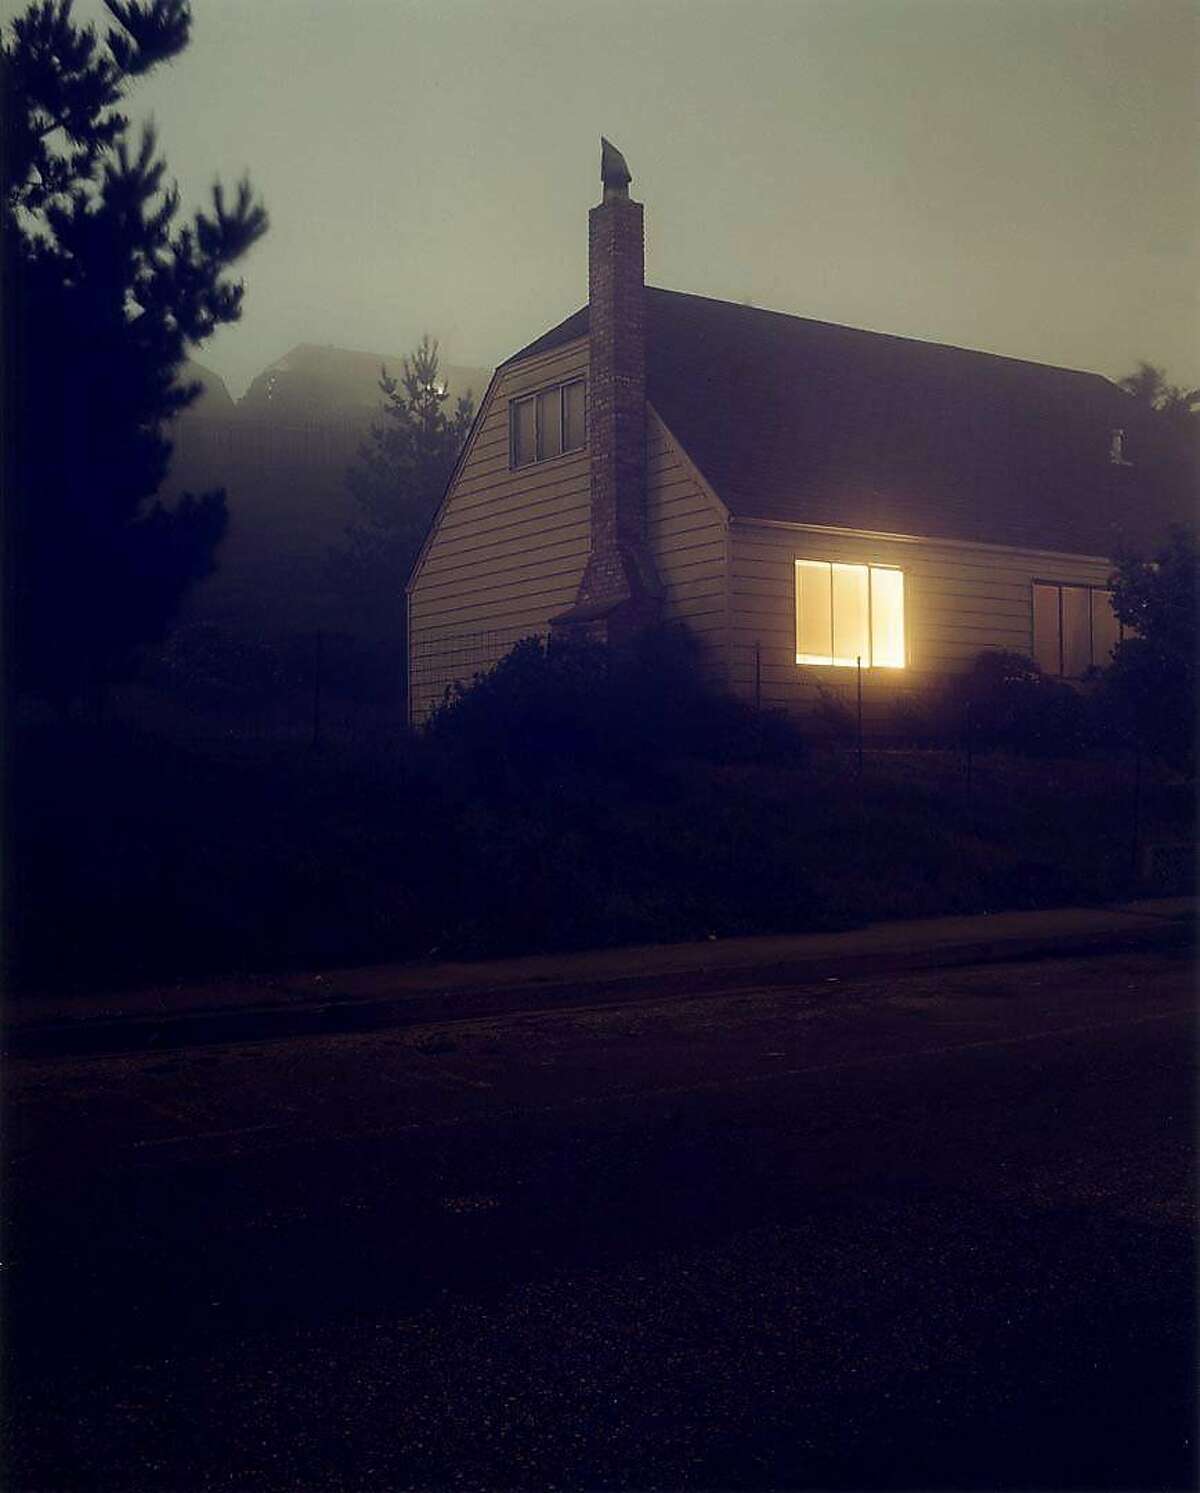 Todd Hido, Untitled #2027-b, 1997. Archival Injet print, 30 x 38 inches. Credit: Todd Hido